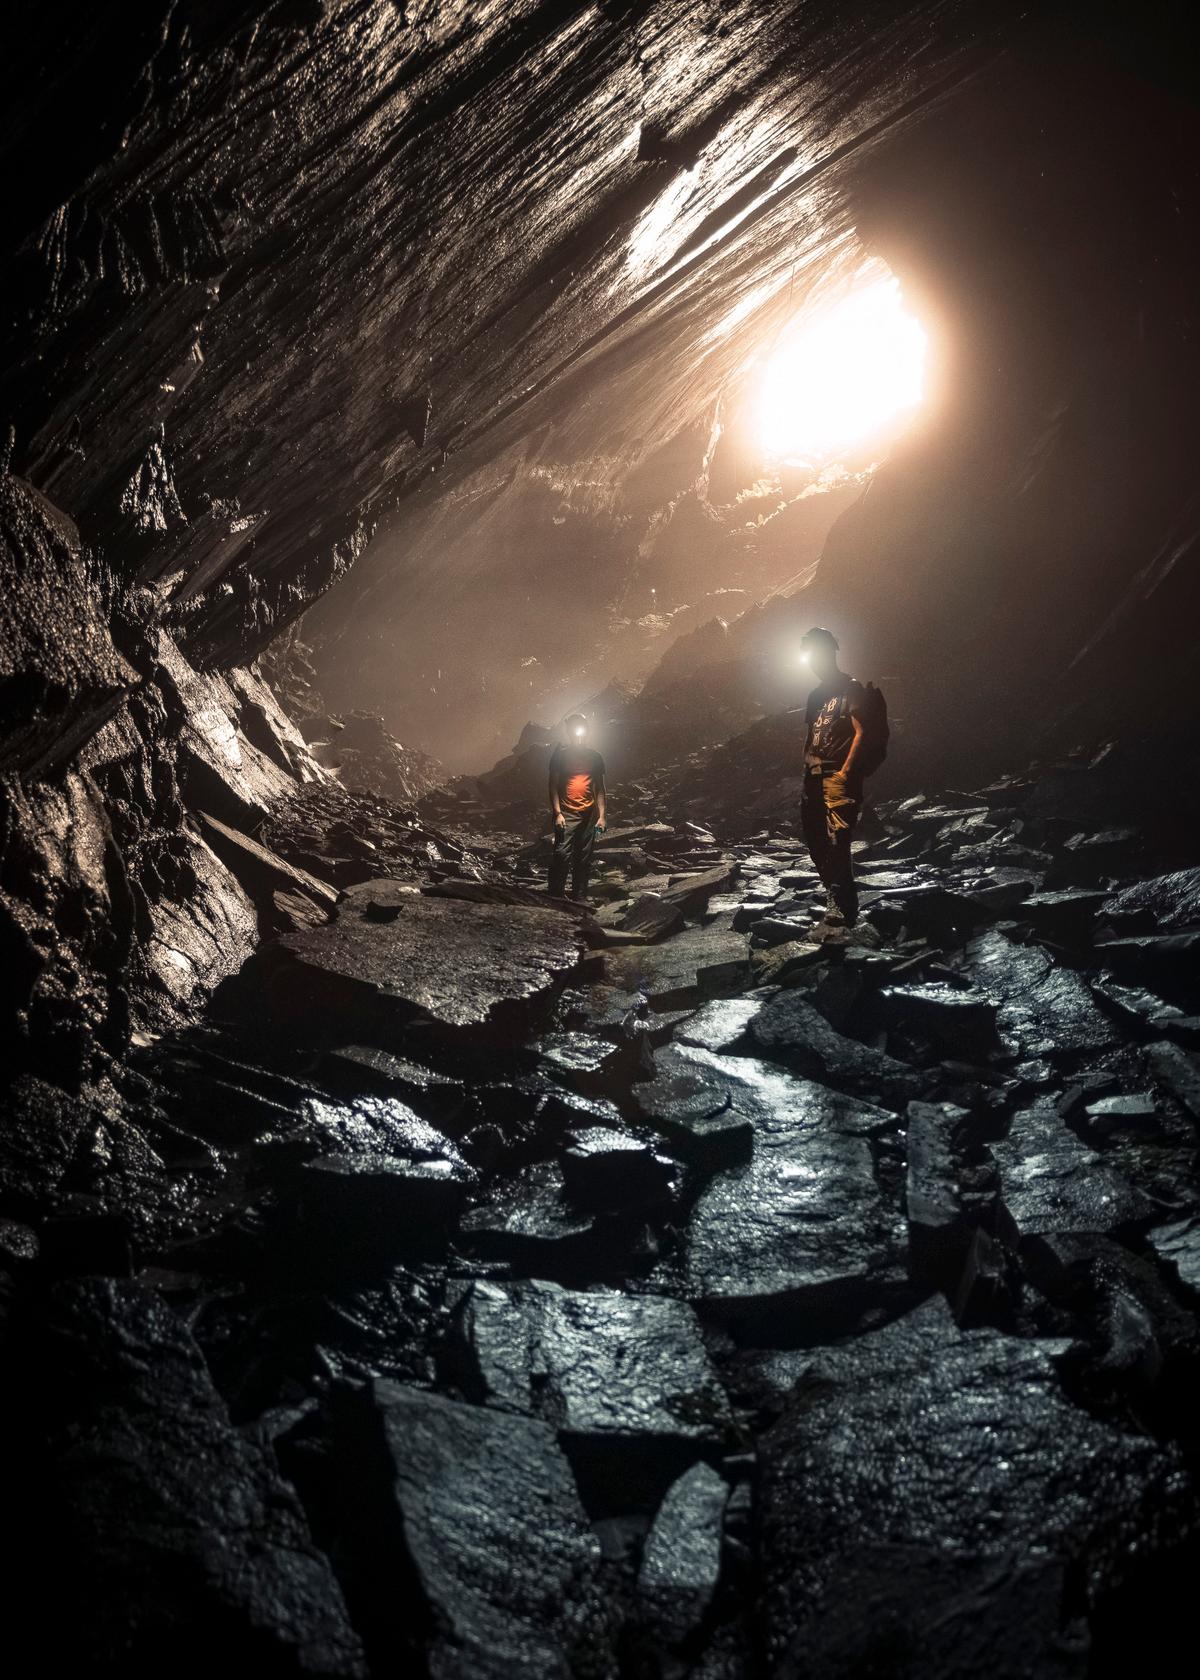 These incredible photos of slate mines show the mystery hidden deep beneath the ground in Wales. (Courtesy of Caters News)